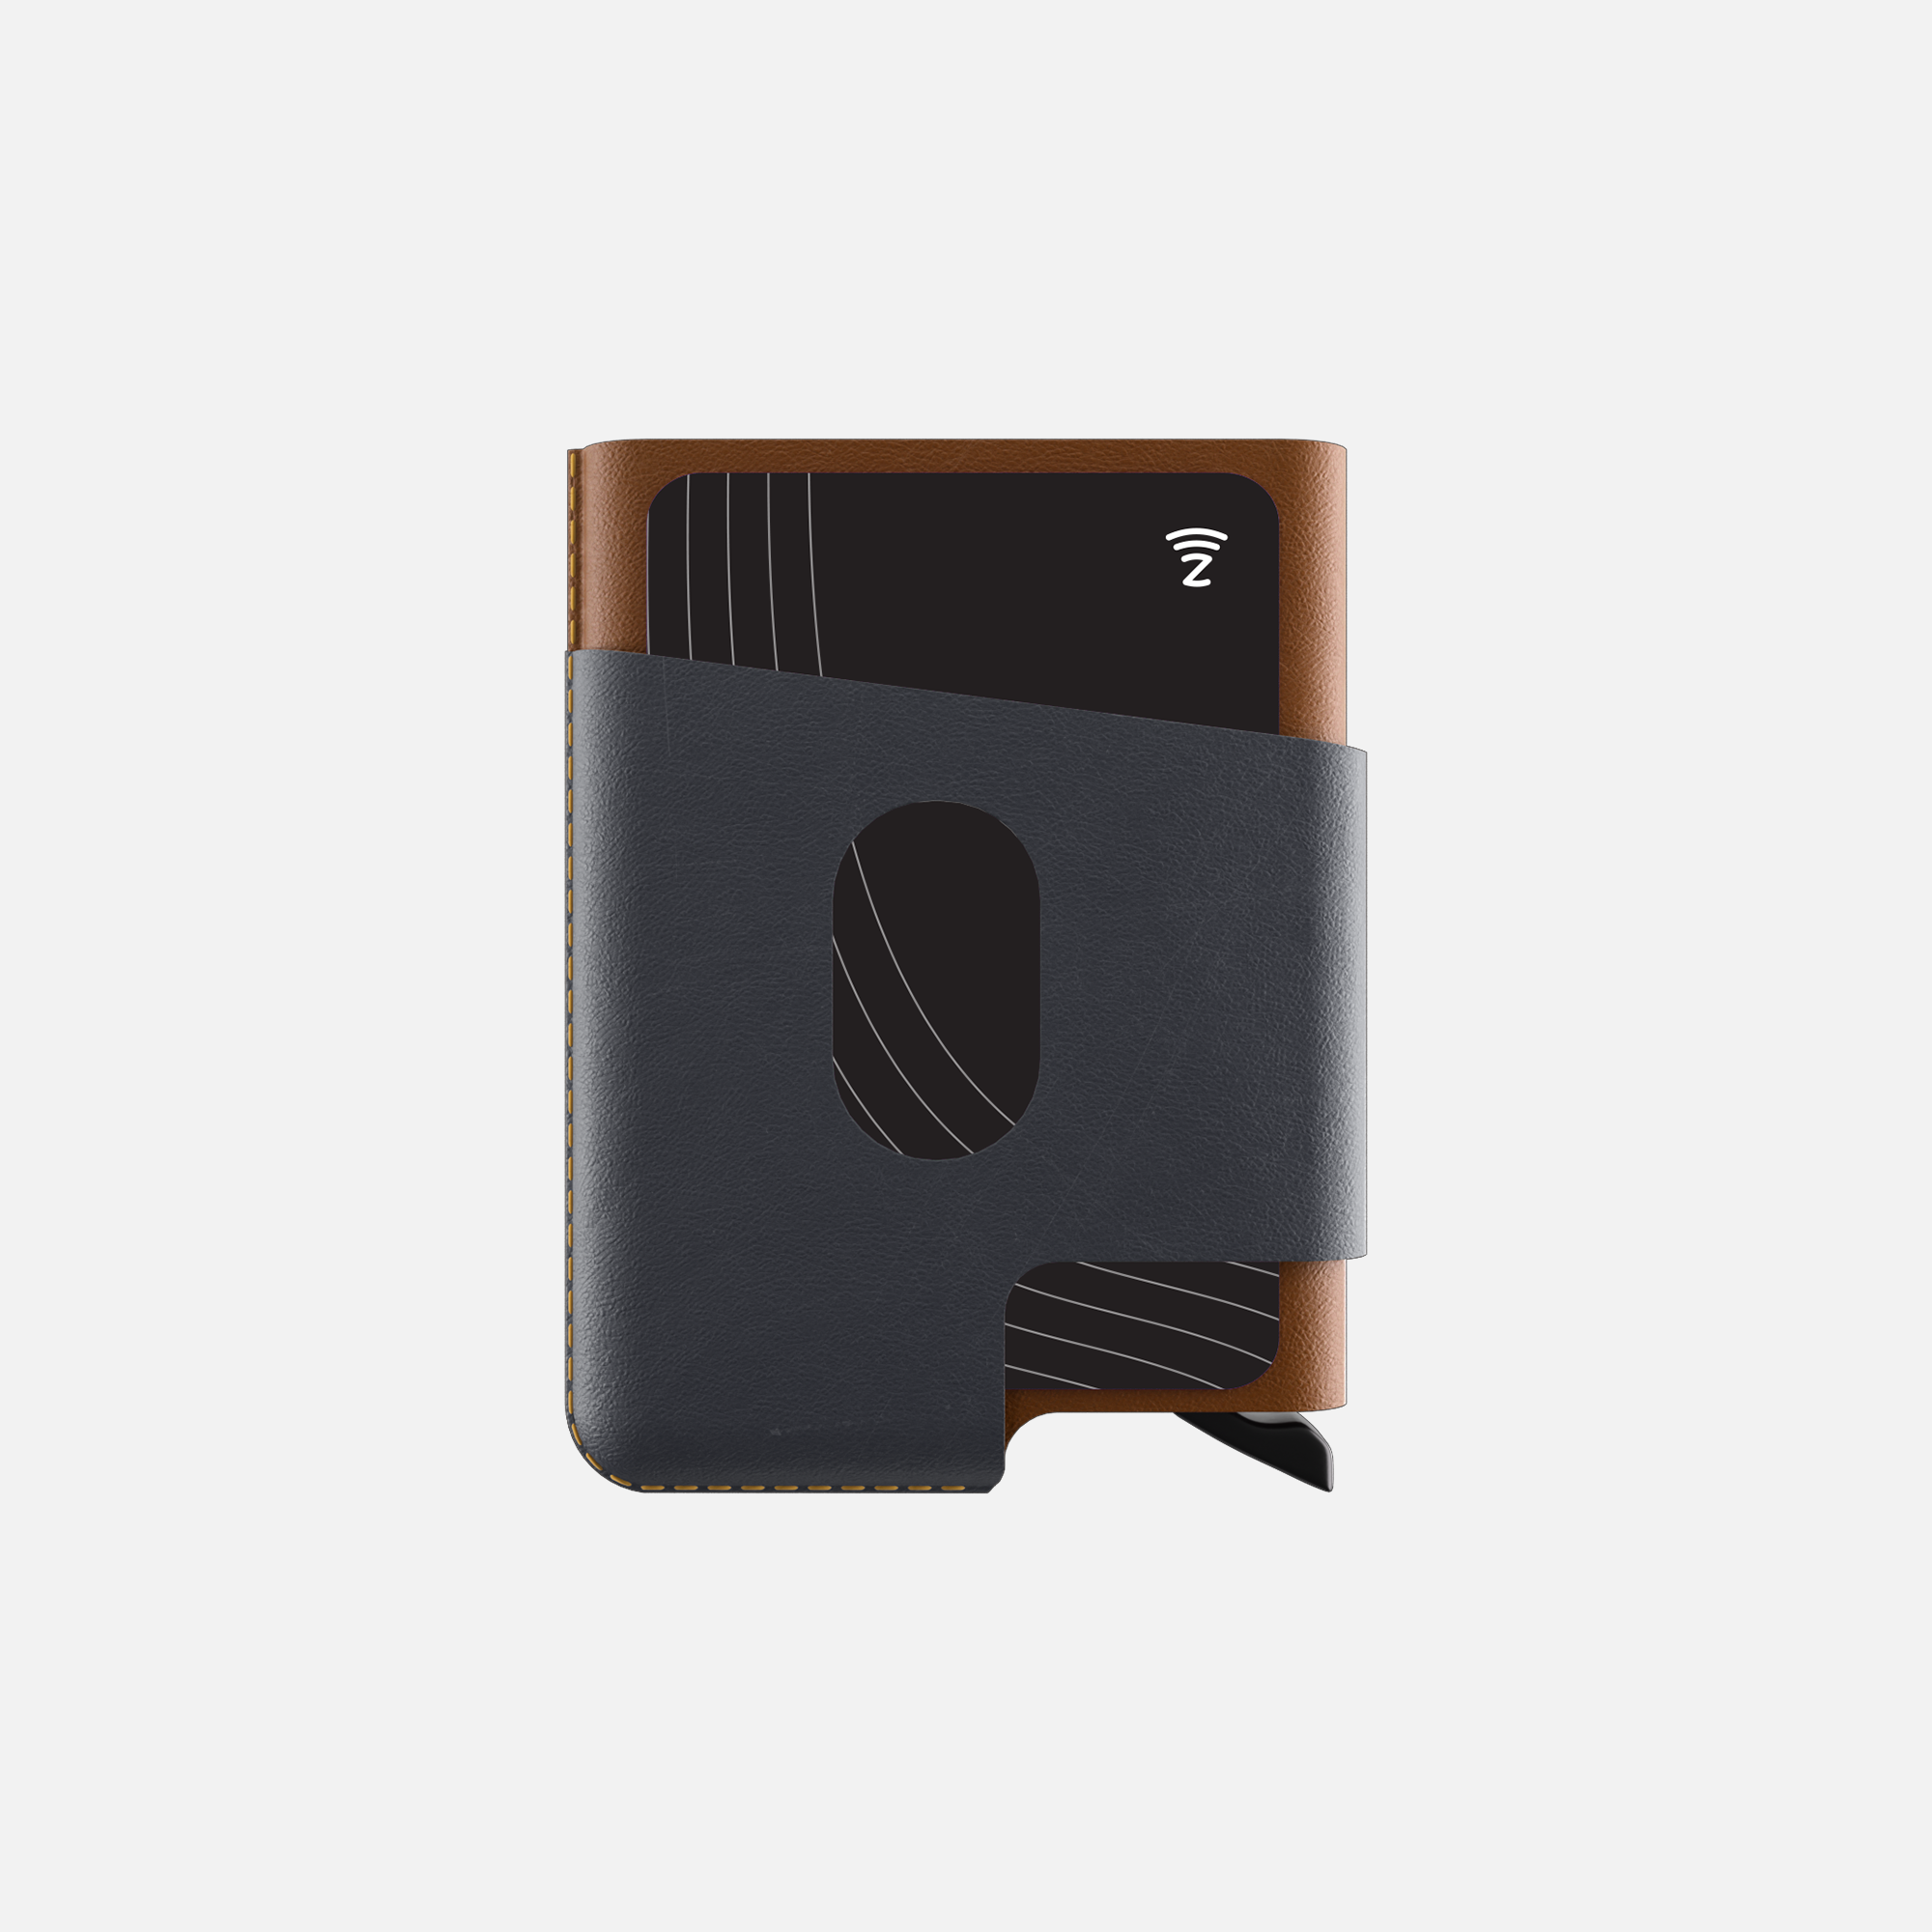 Cardholder leather wallet with black credit card inside, isolated on a white background.